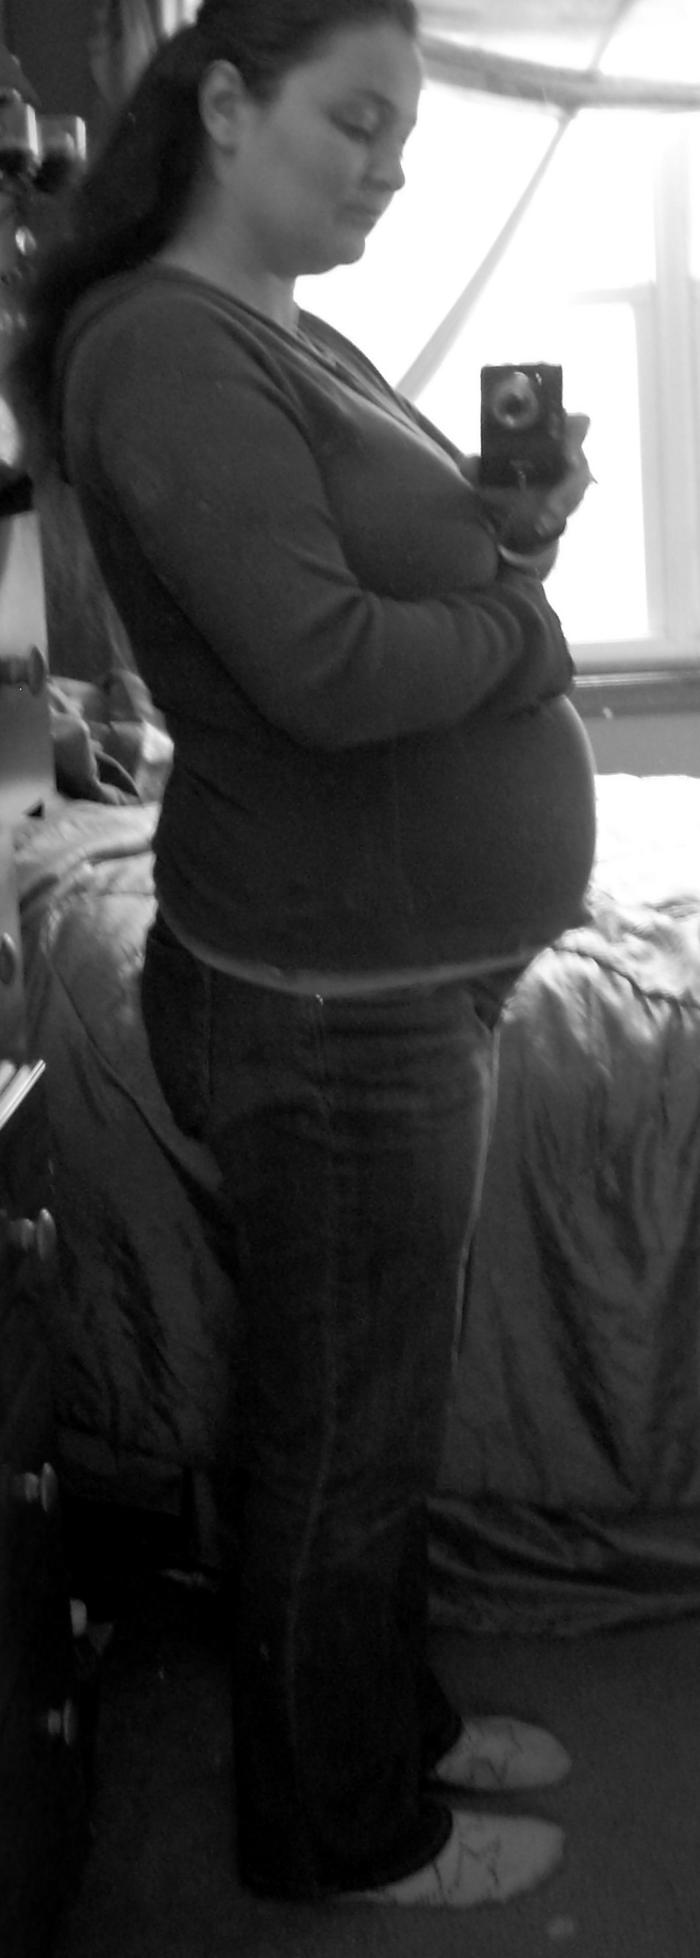 ooh fancy black and white shot at 23 weeks